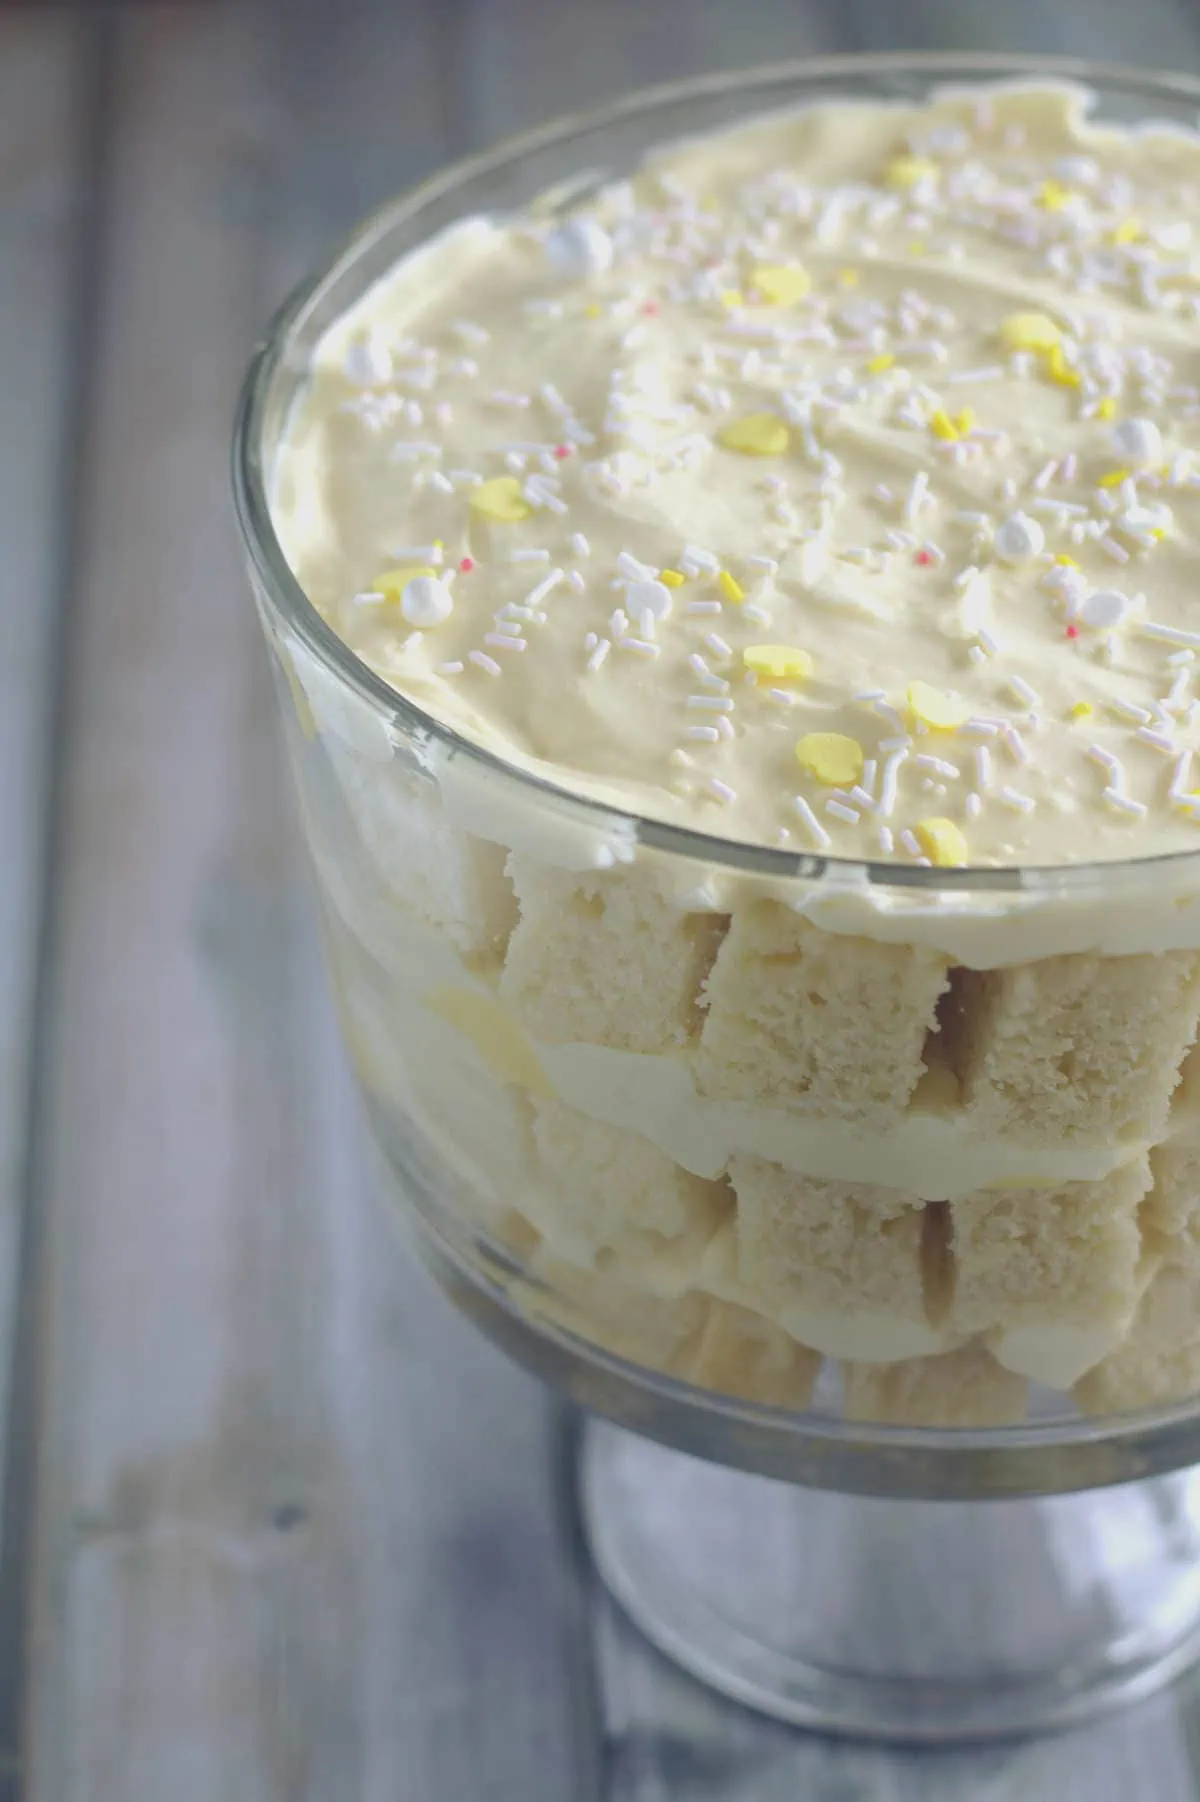 A trifle in a clear baking dish.  There are three layers to the trifle, and the top is decorated with white and yellow sprinkles.